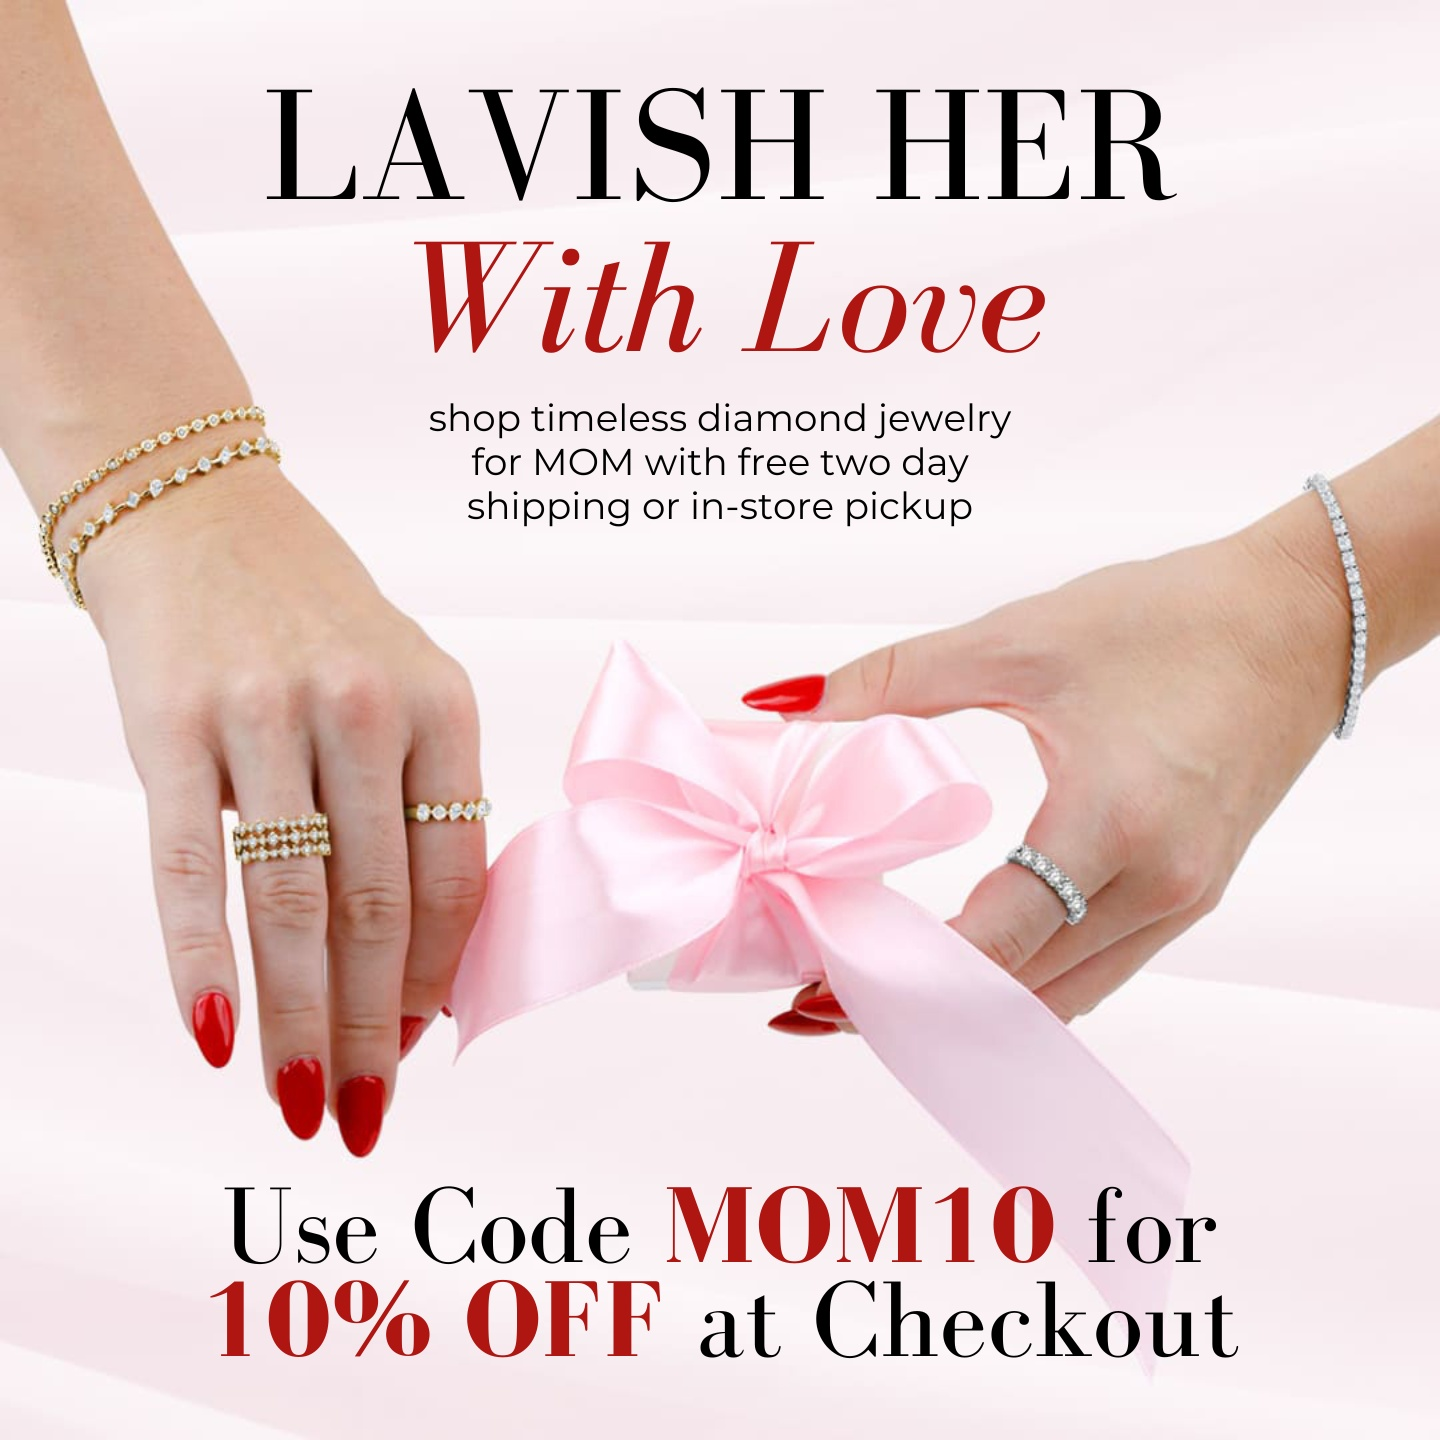 Mothers Day Jewelry Sale Robert Irwin Jewelers. Great gifts for Mom. Free shipping or in-store pickup. 